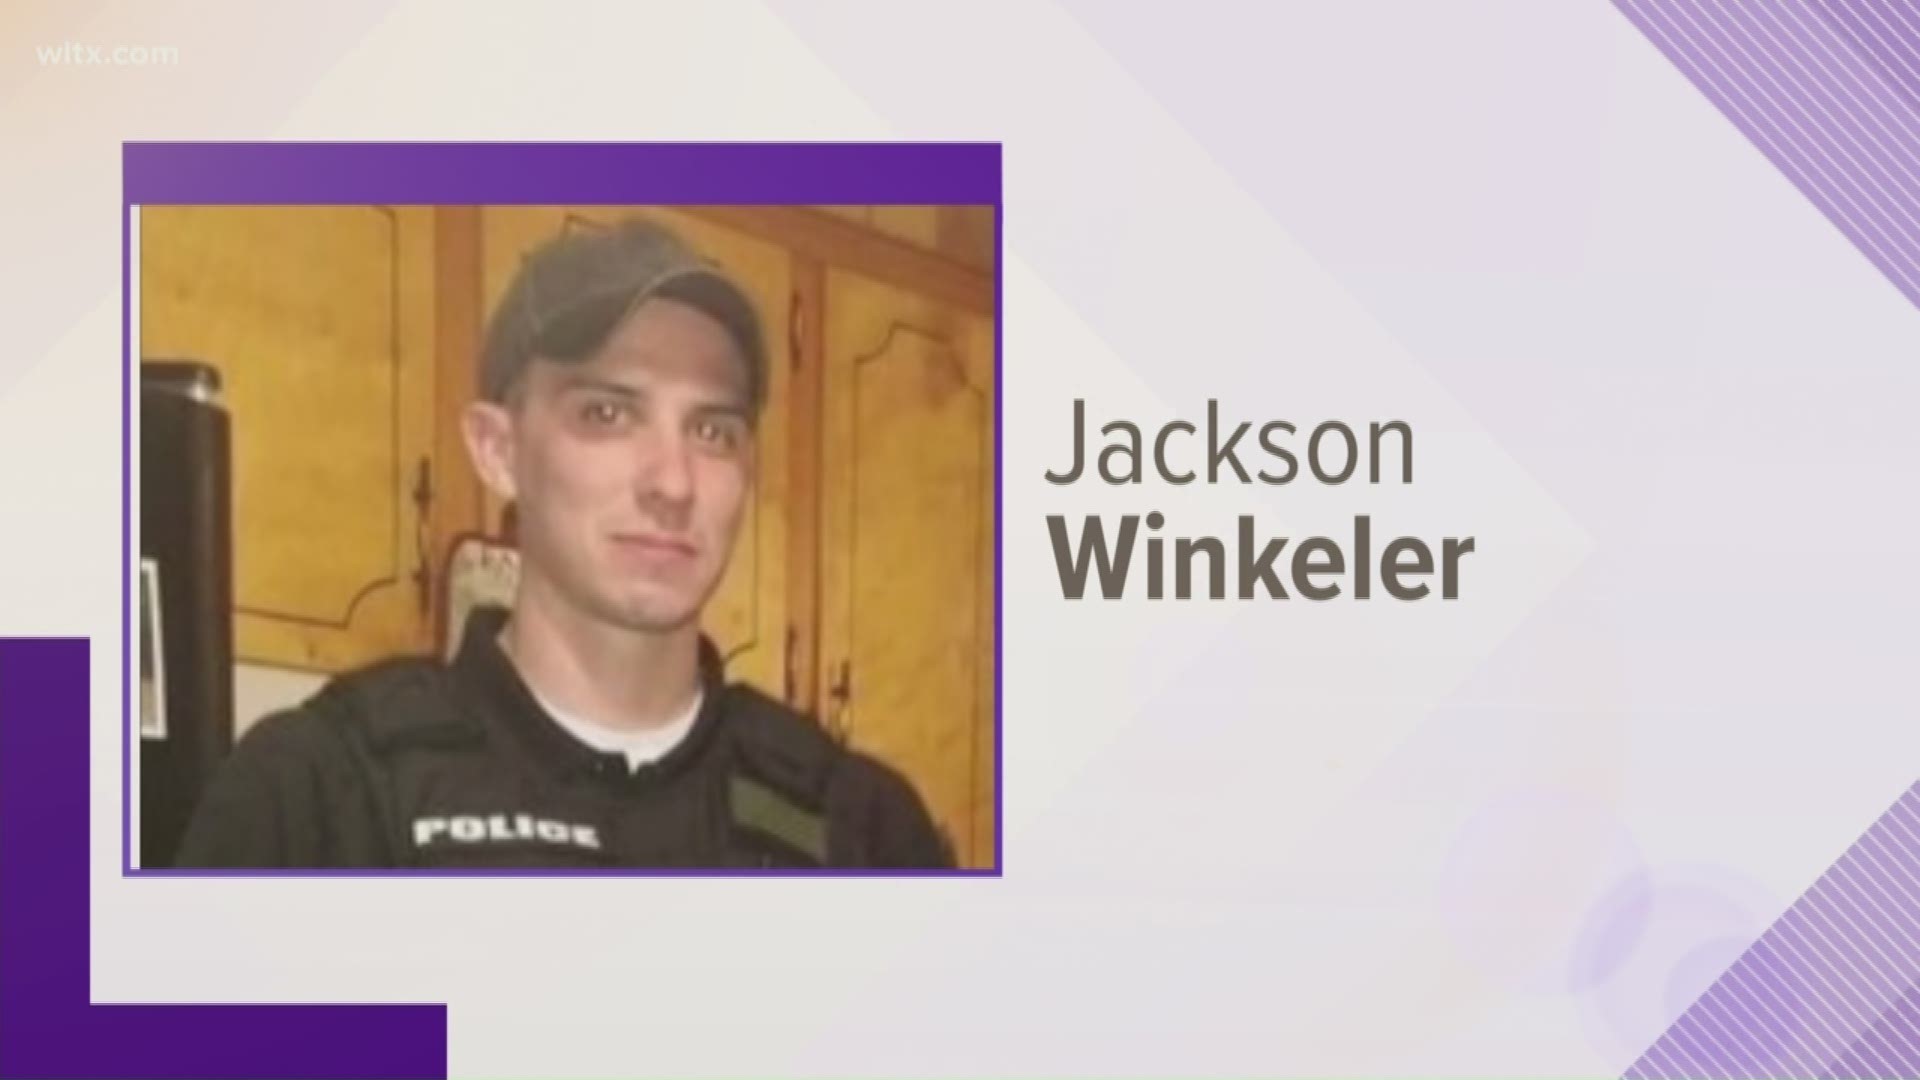 James Edward Bell is accused of shooting and killing Officer Jackson Winkeler Sunday morning.